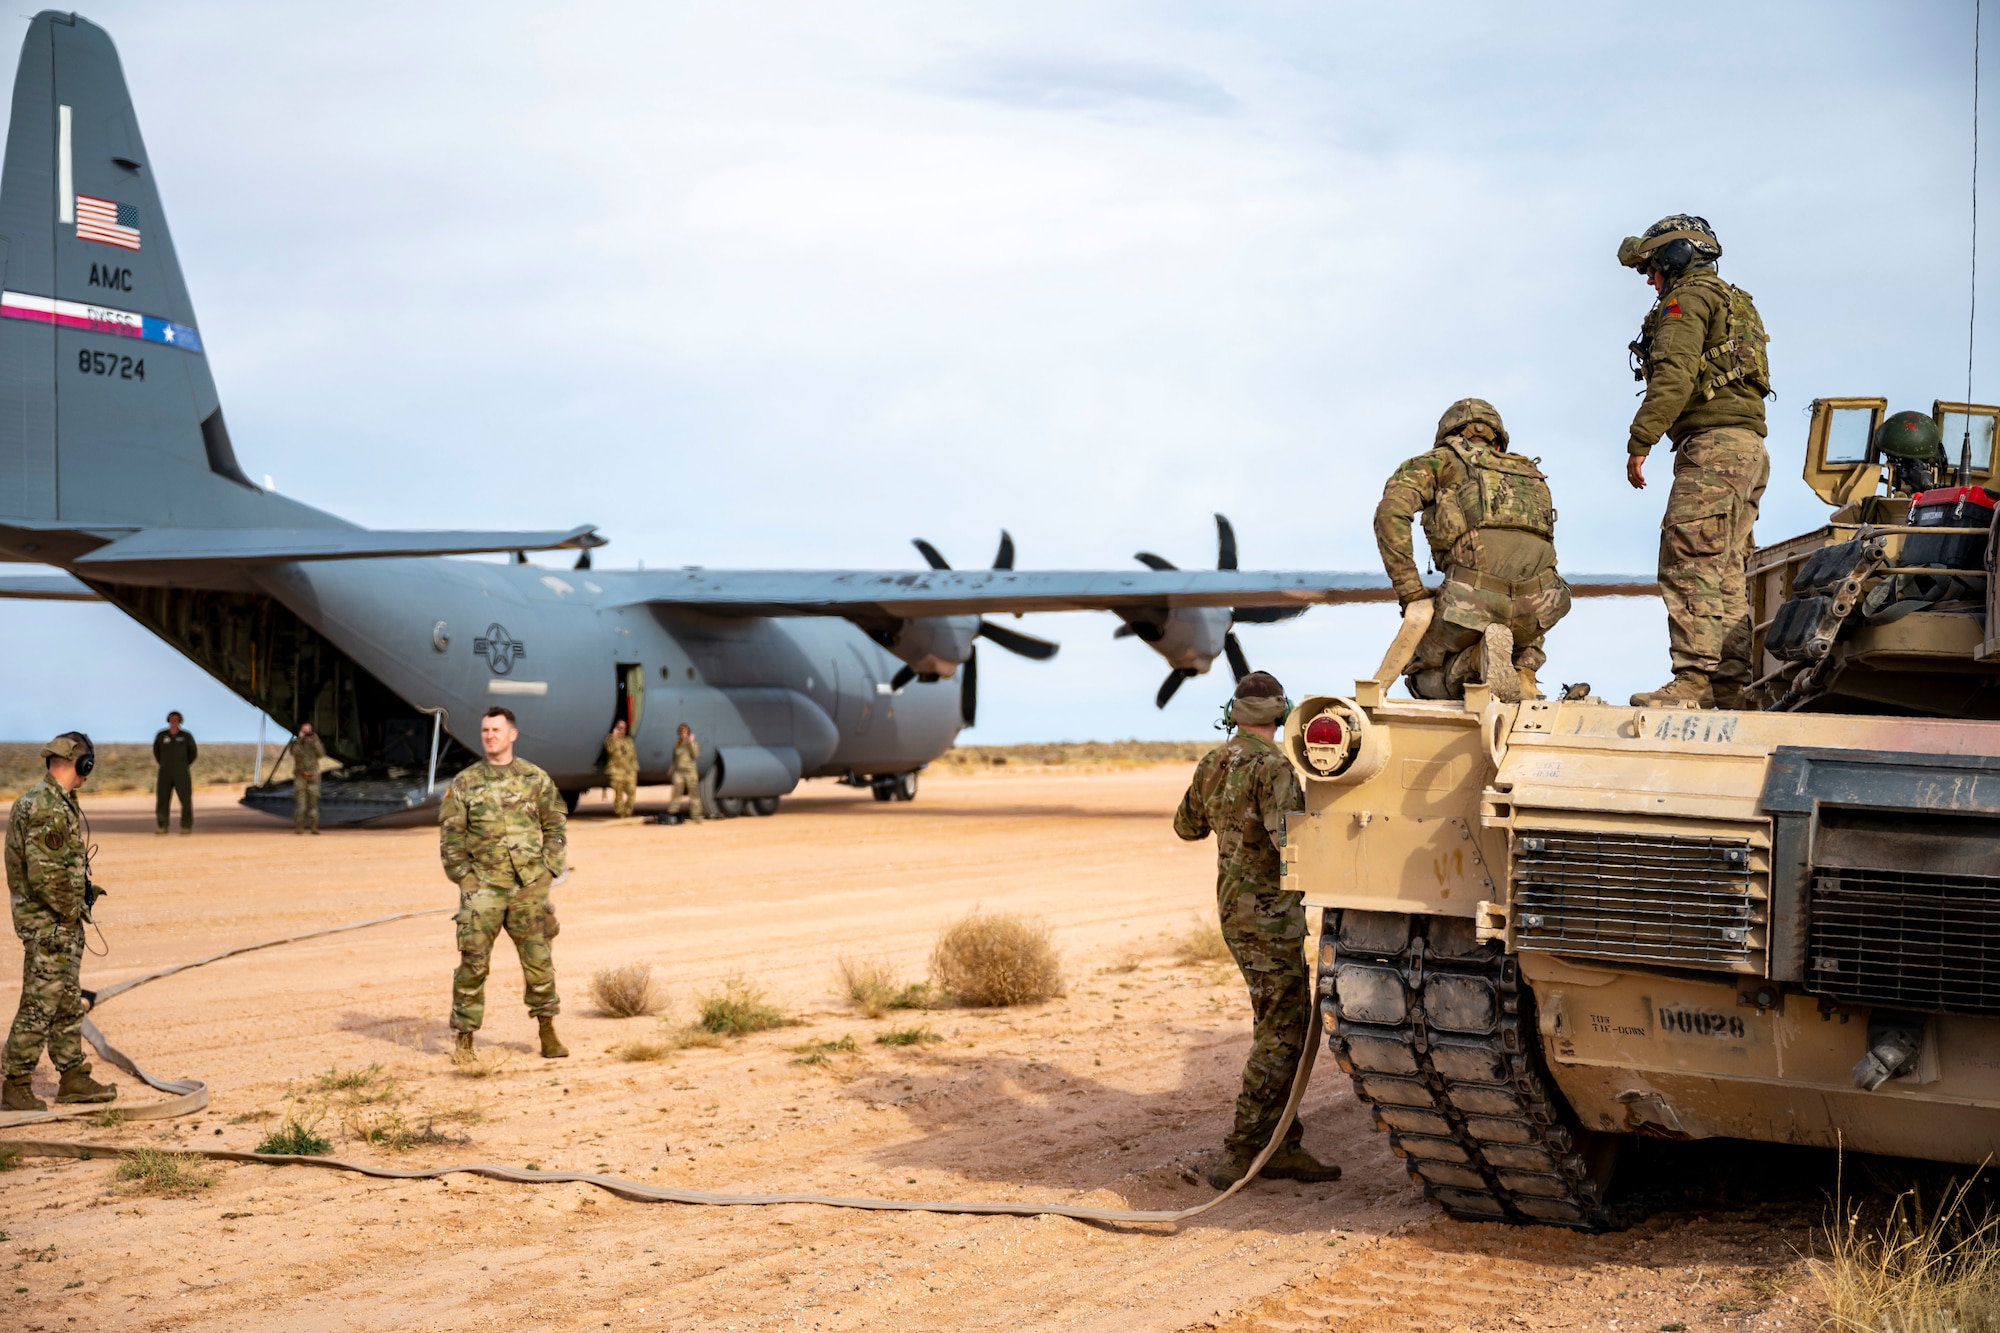 U.S. Army members assigned to the 1st Armored Division and 40th Airlift Squadron Airmen simulate refueling a M1A2 Abrams tank from a C-130J Super Hercules at Fort Bliss, Texas, Dec. 9, 2022. Hot pit refueling allows aircraft to receive or provide fuel without being shut down, implementing quicker refueling and shorter down time. (U.S. Air Force photo by Senior Airman Leon Redfern)